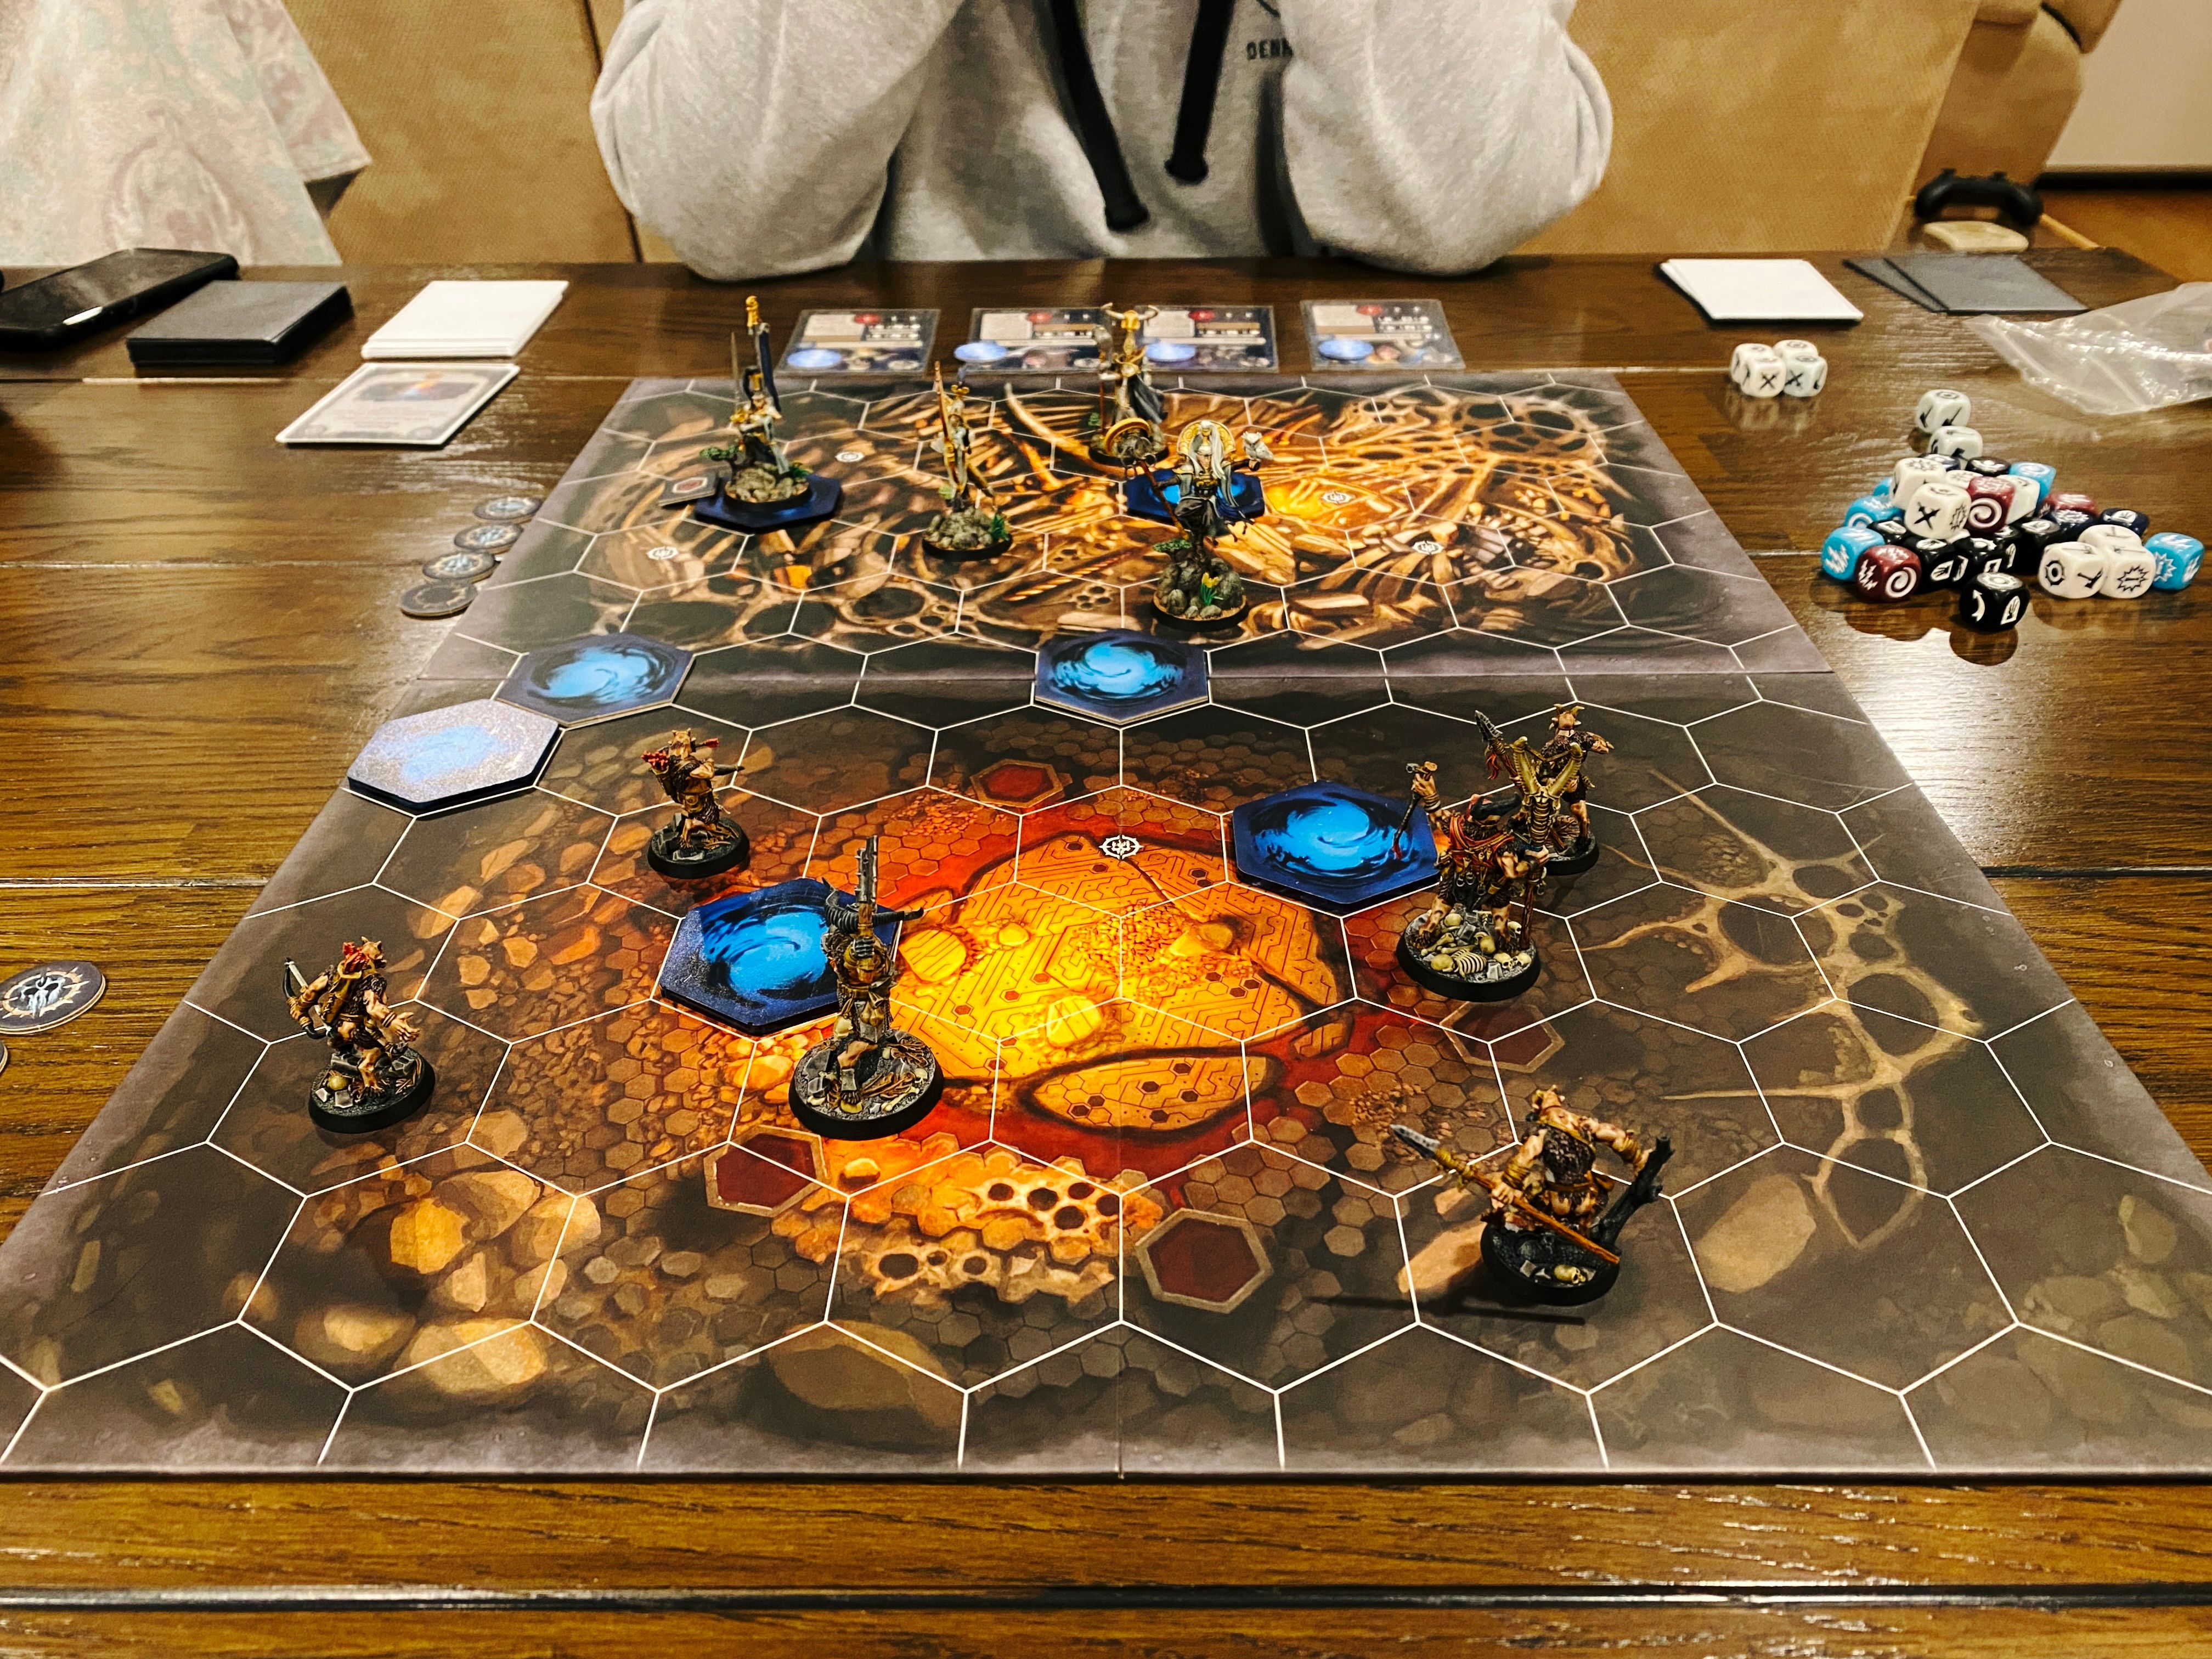 A photo of Warhammer Underworlds game board. The board itself is covered in hexes with the artwork underneath looking like deep within a cave, and at the front closest to the camera are six savage beastmen all yelling and wielding weapons like they're about to charge, and facing them across the board are four lithe and elegant aelves.